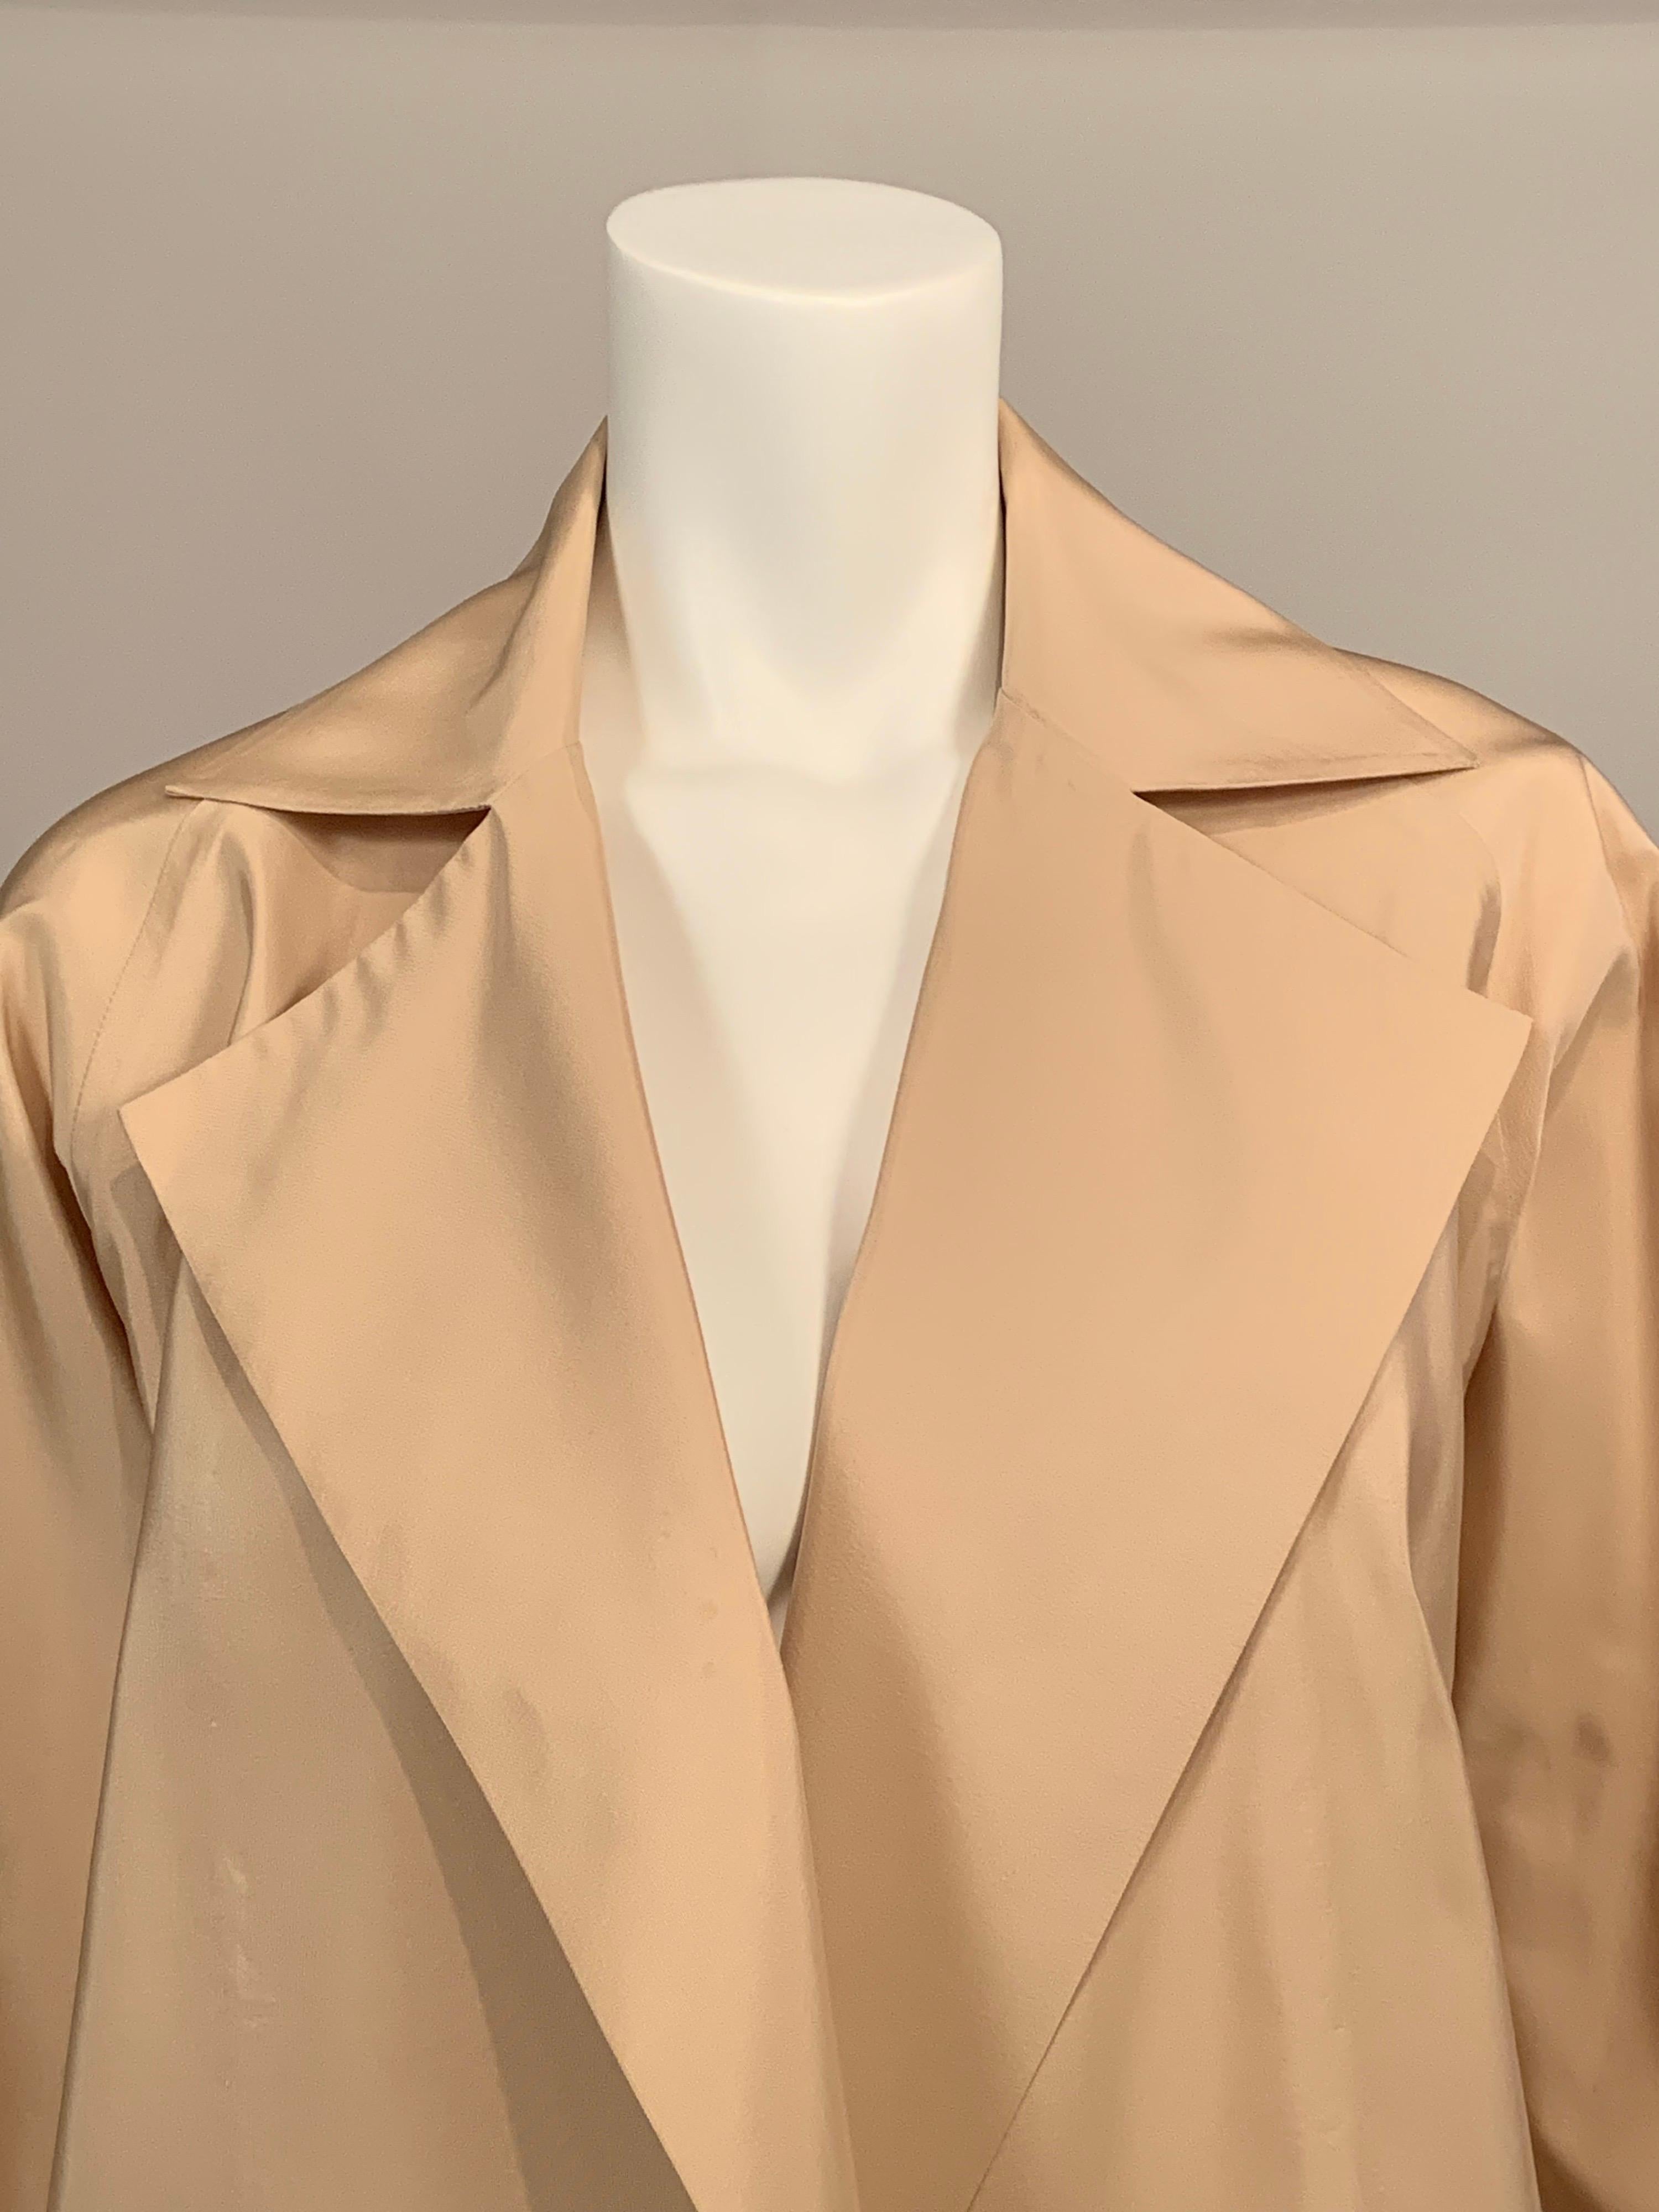 Ronaldus Shamask designs are grounded by his background in architecture.  Clean lines and straight forward design. with no unnecessary  embellishment define his style.  This spare unlined khaki colored silk coat is a wonderful example of his style. 